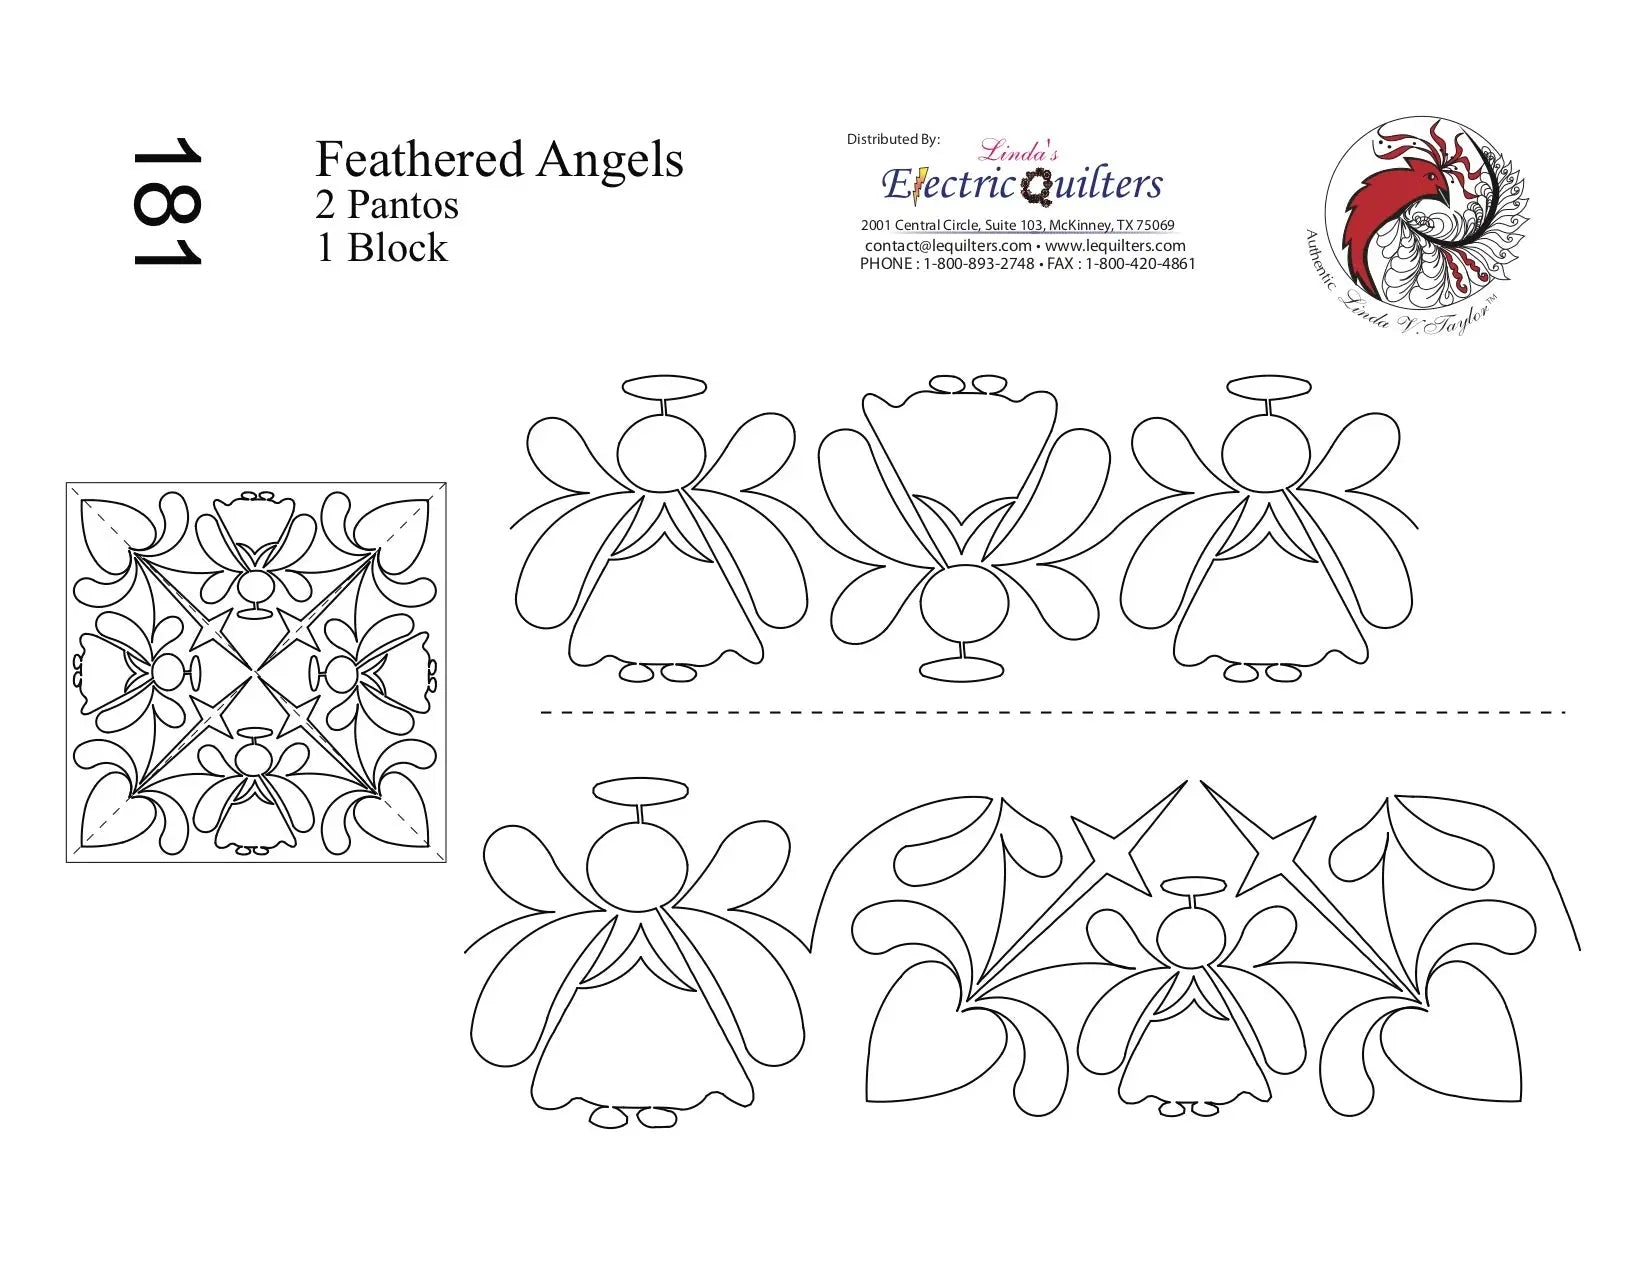 181 Feathered Angels Pantograph with Blocks by Linda V. Taylor - Linda's Electric Quilters